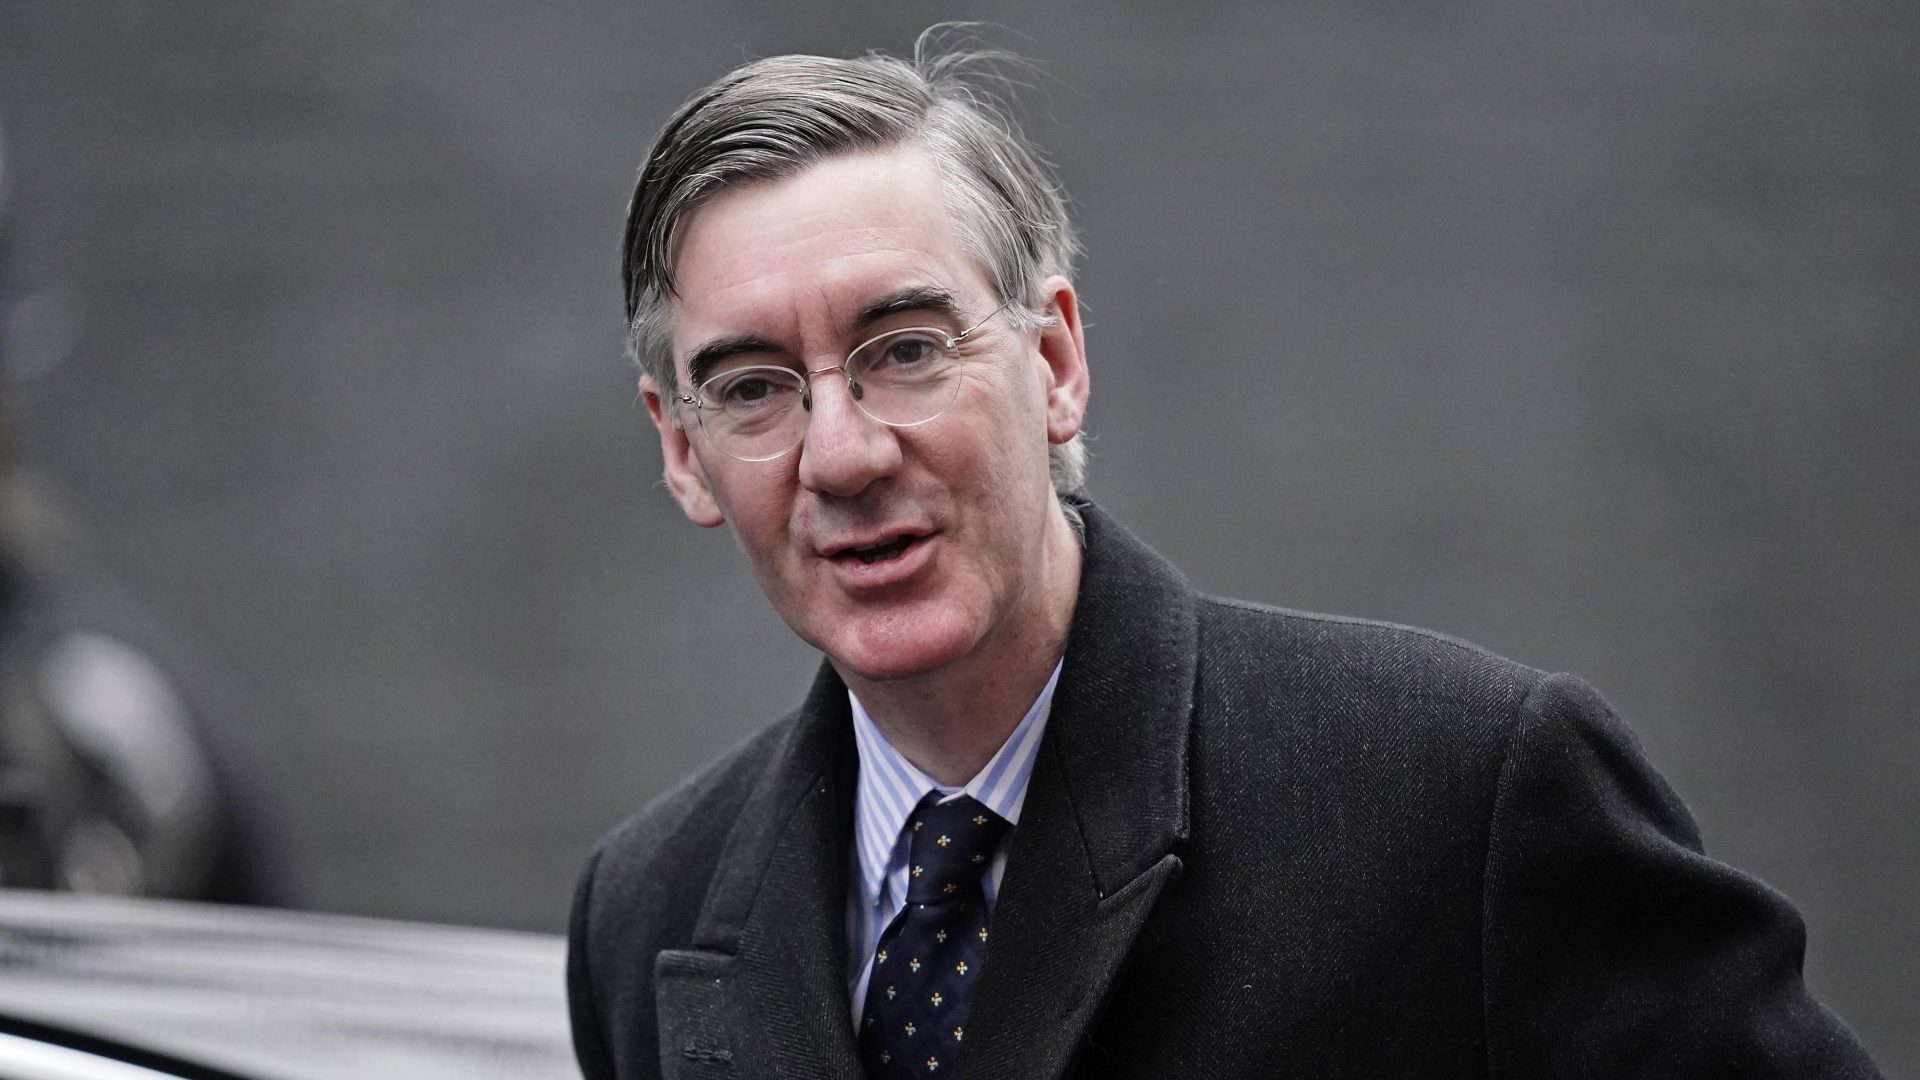 Jacob Rees-Mogg's new job is a joke, but this farce is a fig-leaf for  tragedy - The New European